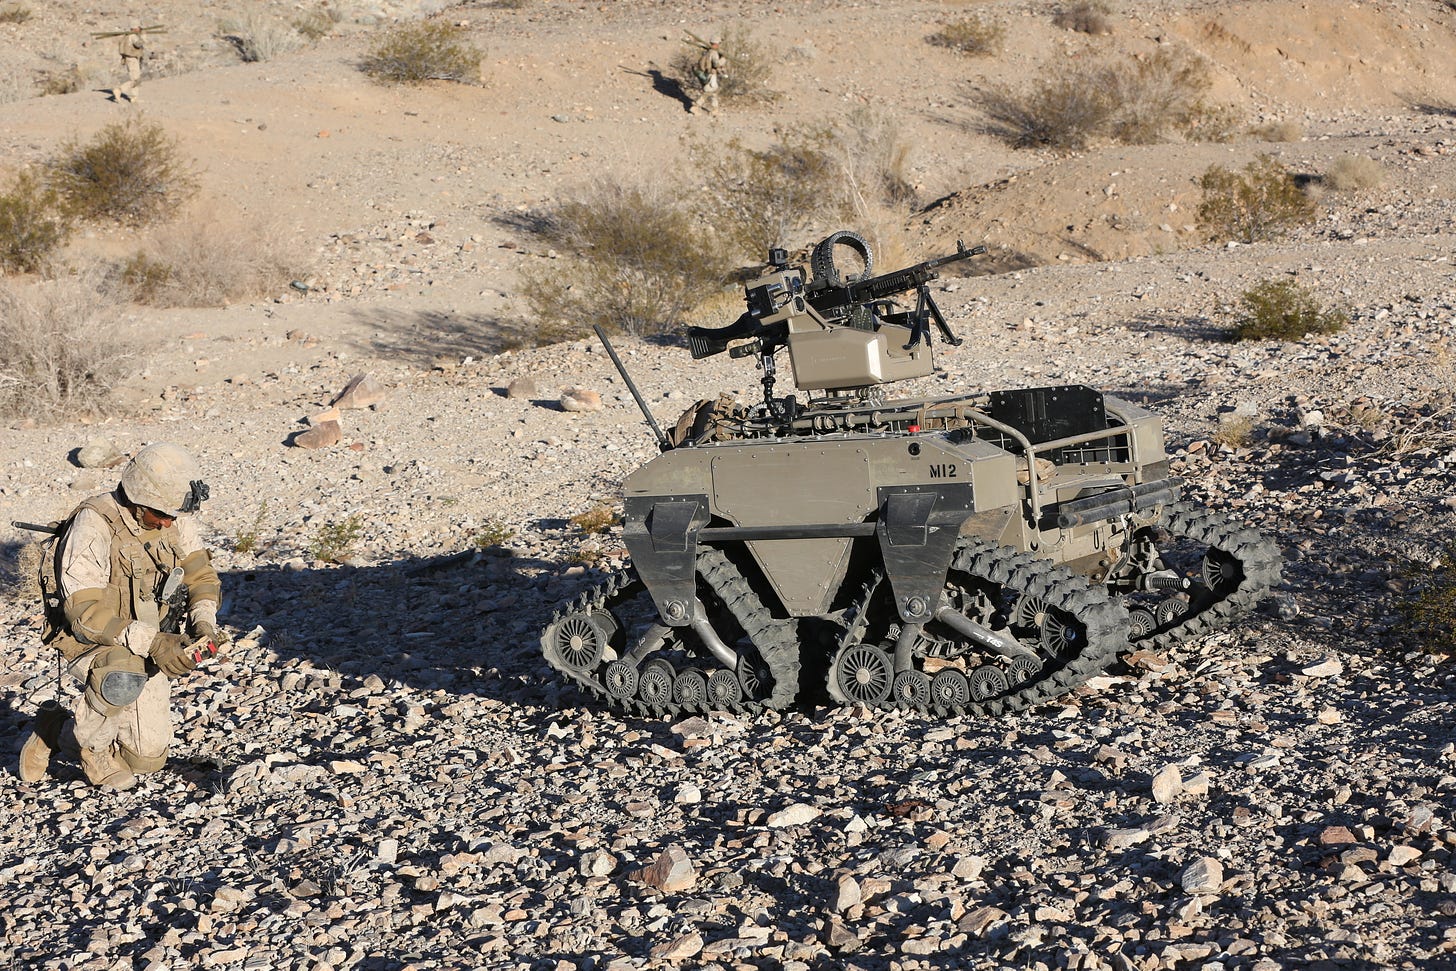 LCpl Jagseer Sindhu a machinegunner assigned to Lima Co, 3rd Battalion, 5th Marine Regiment prepares to engage targets with a Weaponized Multipurpose Unmanned Tactical Transport while participating in an Integrated Training Exercise at the Marine Corps Air-Ground Combat Center, Twentynine Palms, California. This is a training event within their predeployment training curriculum. The Marine Corps Warfighting Laboratory provided some different unmanned aircraft systems (UAS) and unmanned ground systems (UGS) for the Marines to employ during their training cycle. 